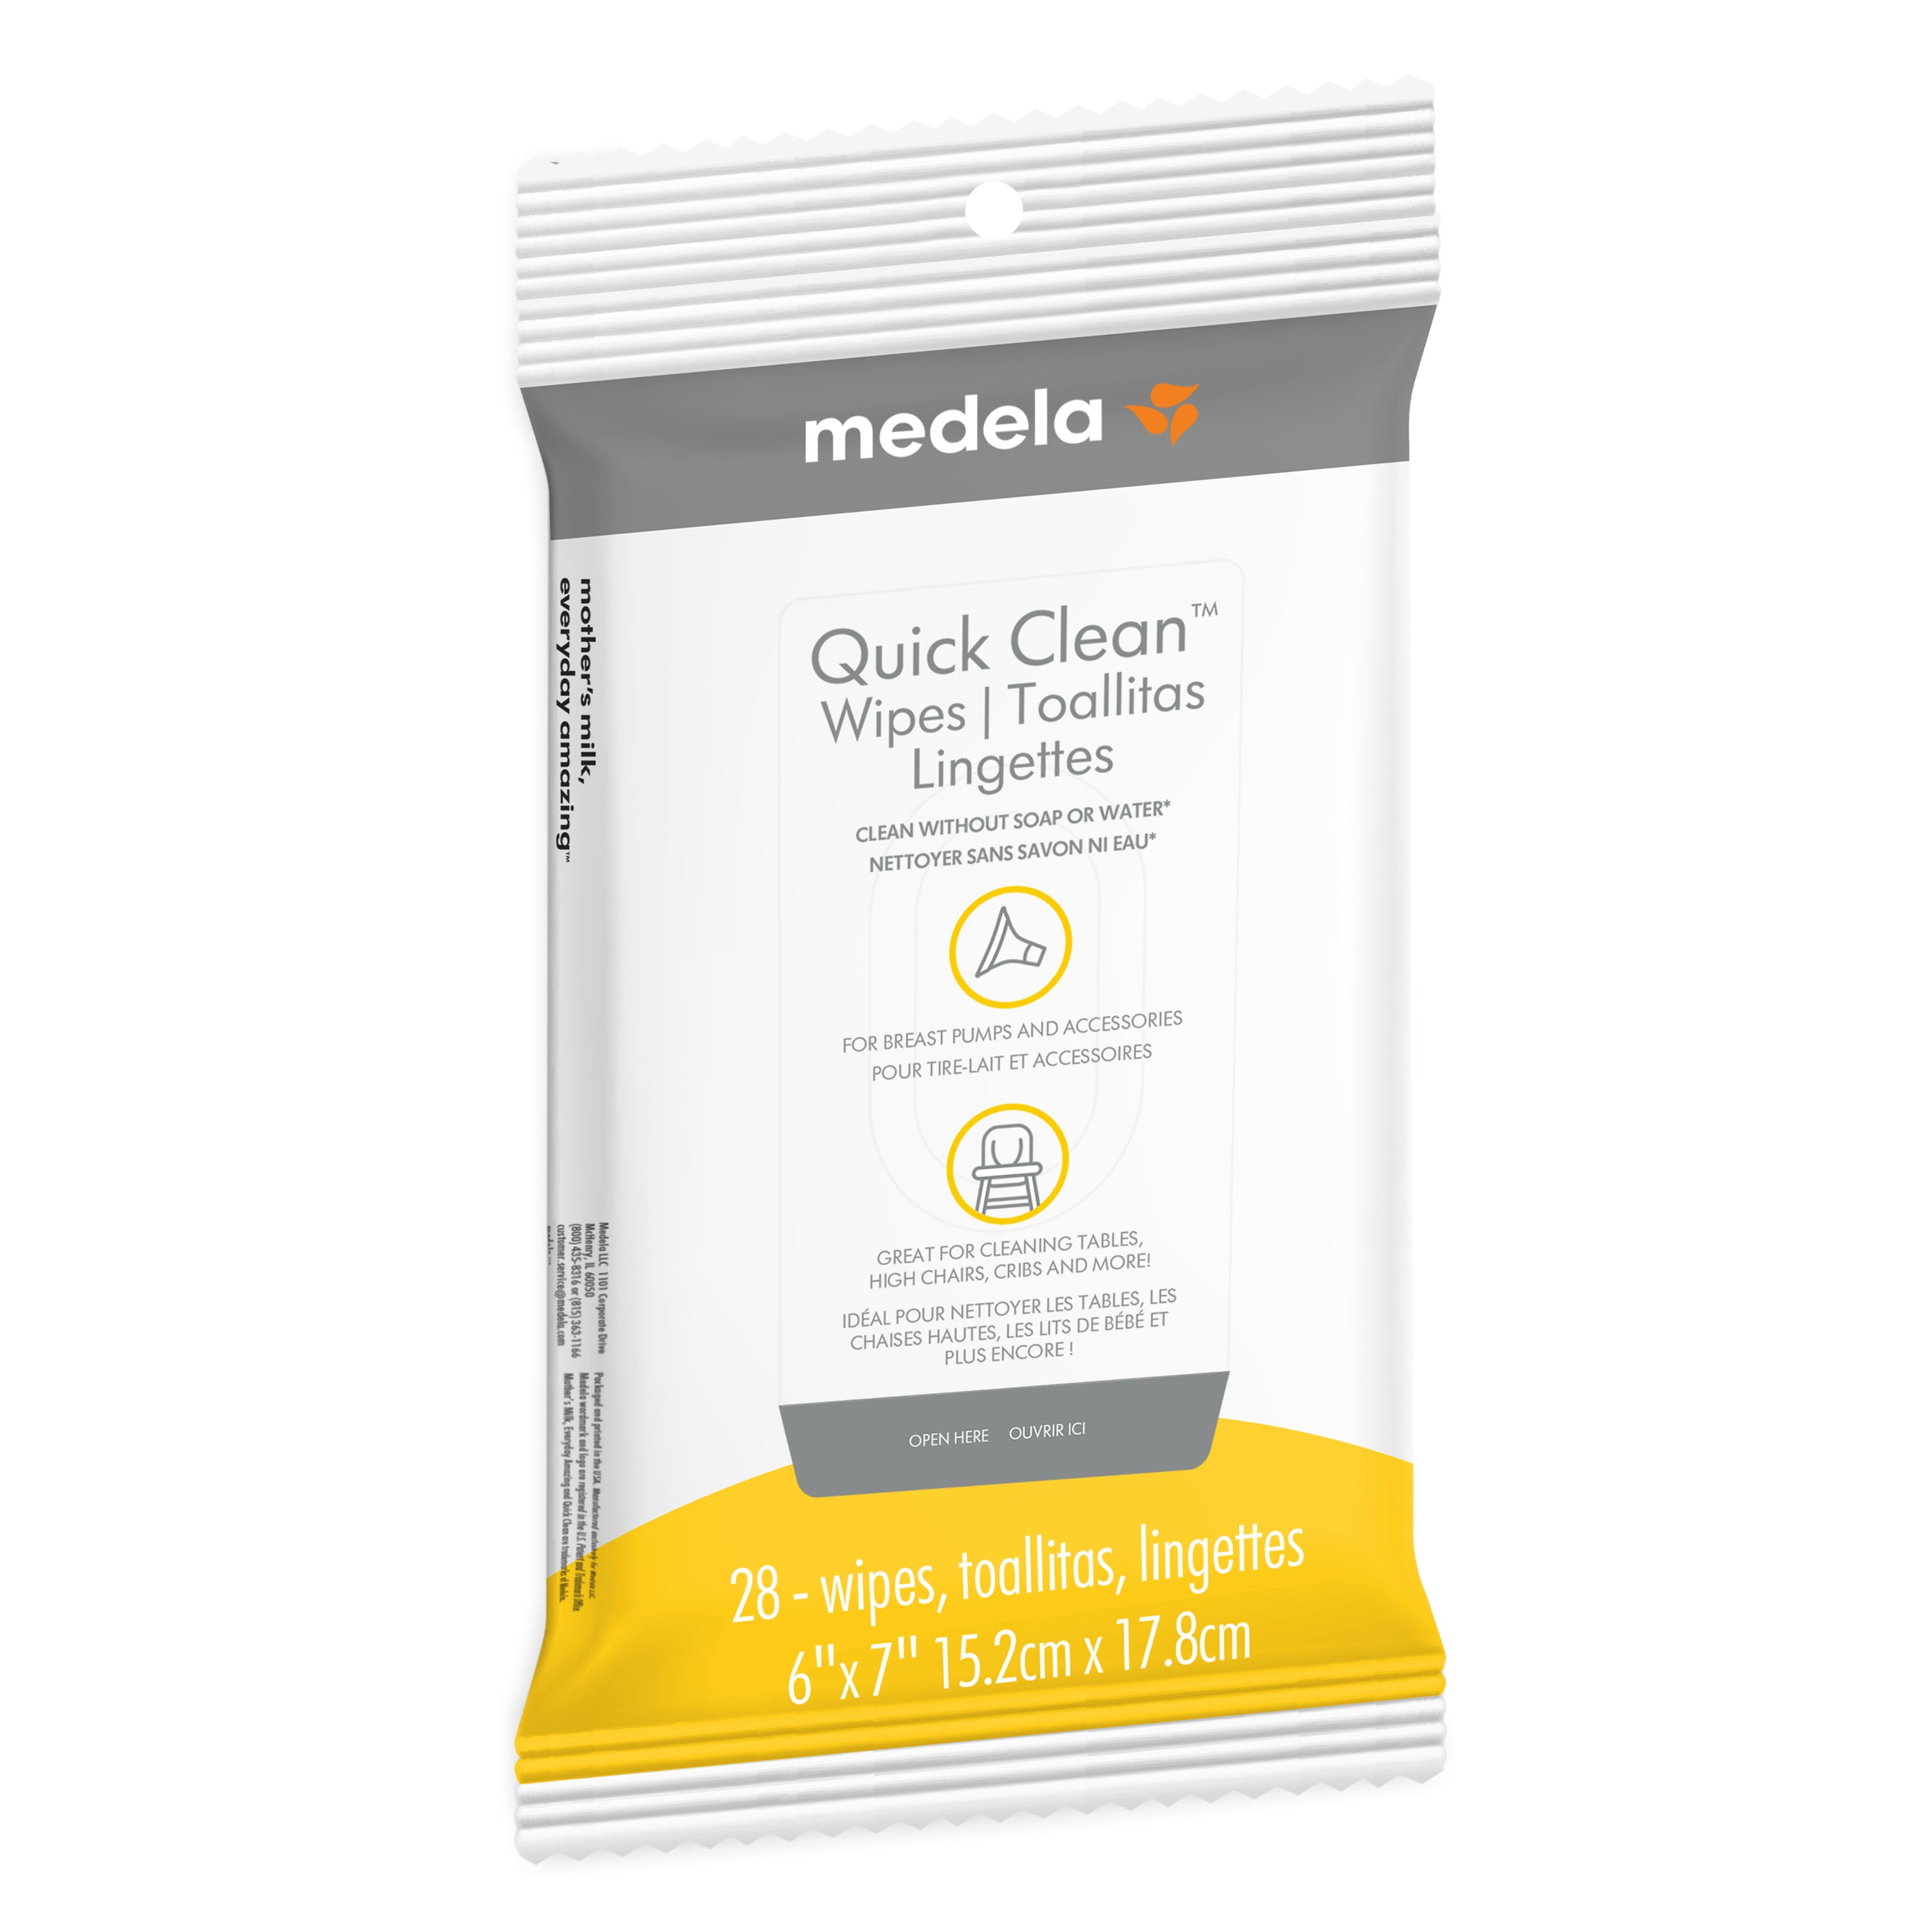 MEDELA QUICK CLEAN WIPE BREAST PUMP KIT ACCESSORY CLEANING WIPES 40 PK #87059 